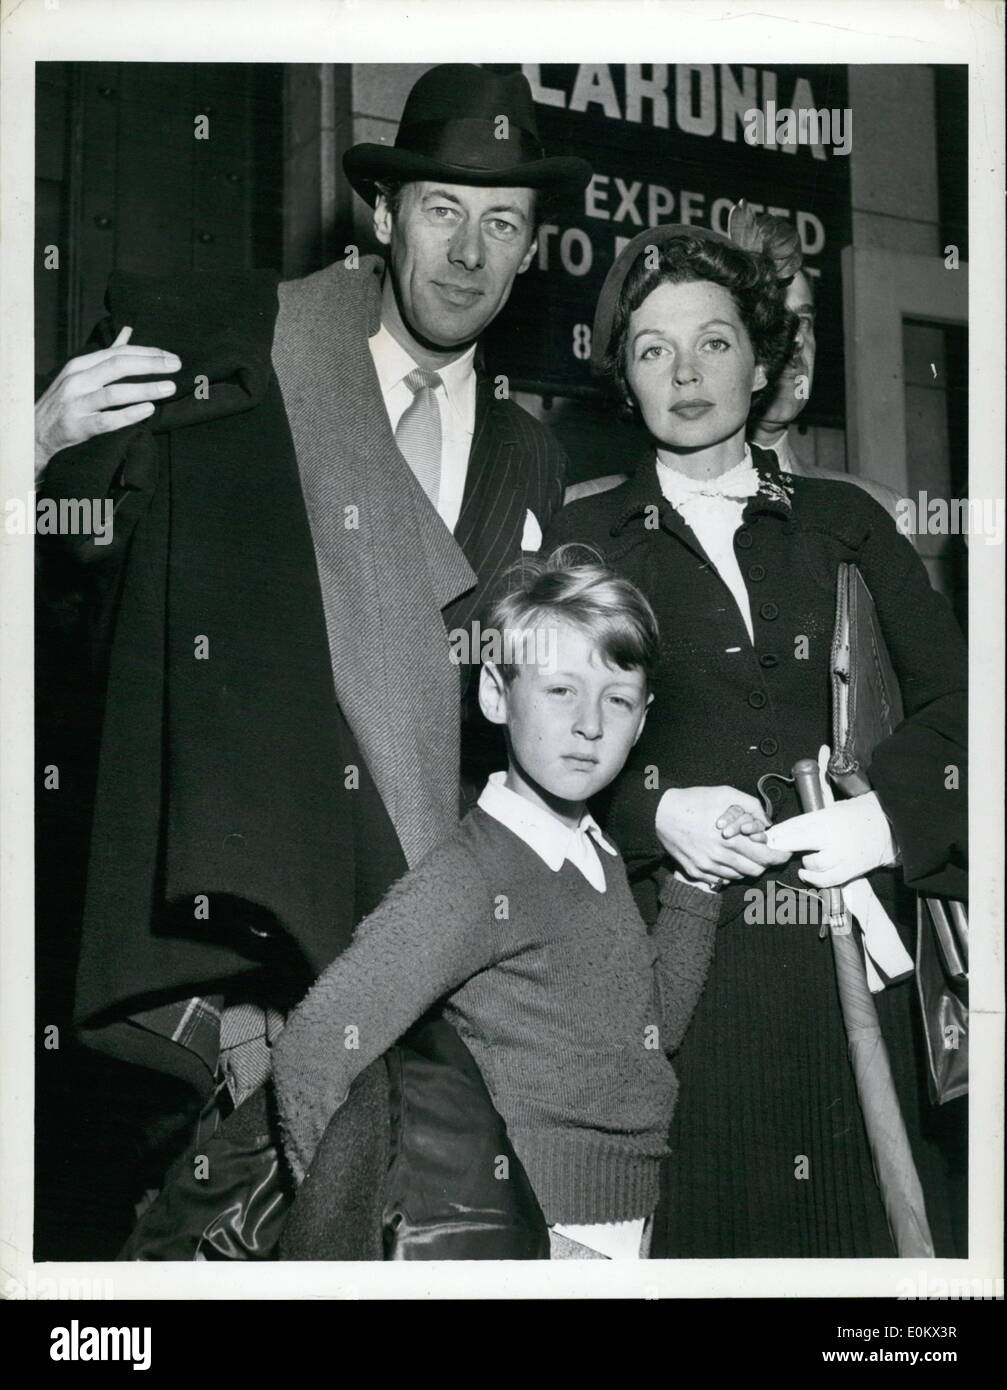 Sep. 09, 1950 - Rex Harrison's arrive: NYC; Pictured on their arrival in New York are Rex Harrison, his wife, Lily Palmer and their son, Carey. They arrived aboard the Queen Mary. Stock Photo